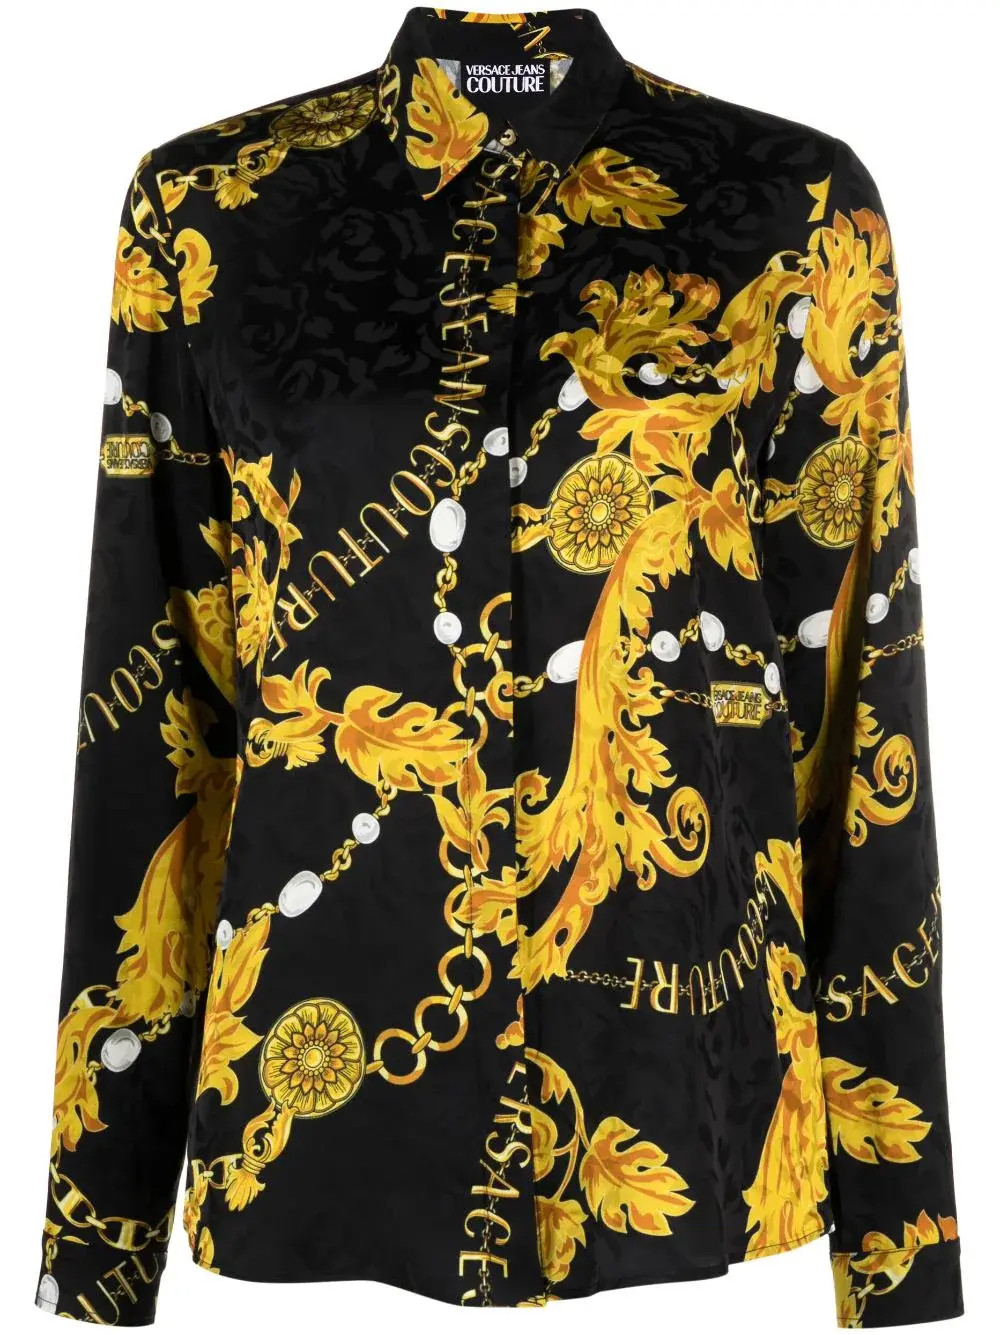 Afbeelding van Versace Jeans Versace jeans couture blouse flower chain gold